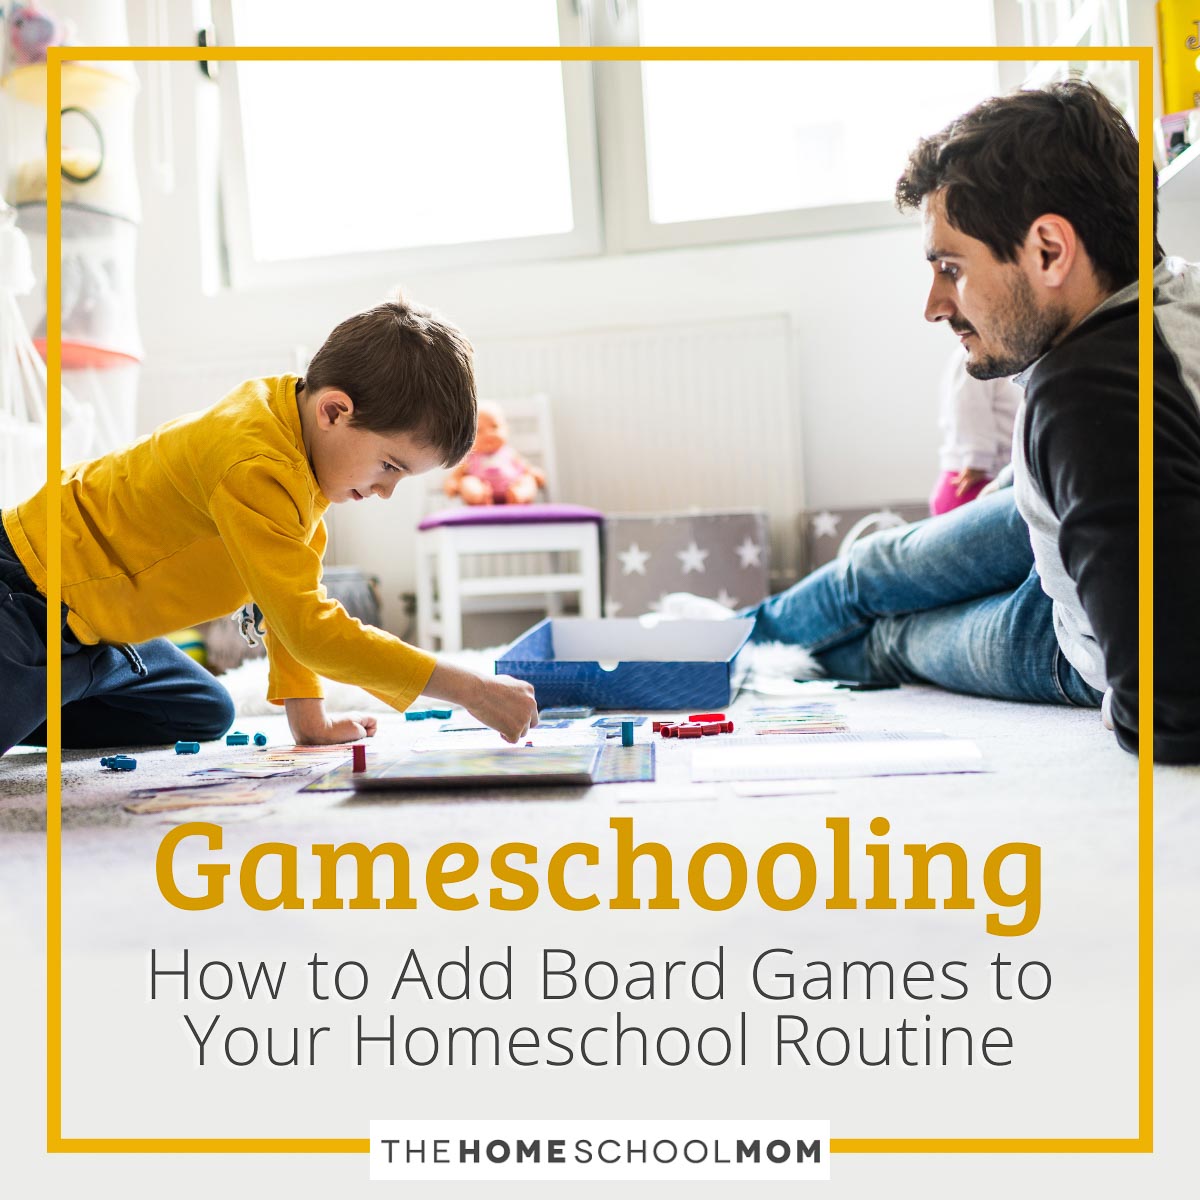 Gameschooling — How to Add Board Games to Your Homeschool Routine